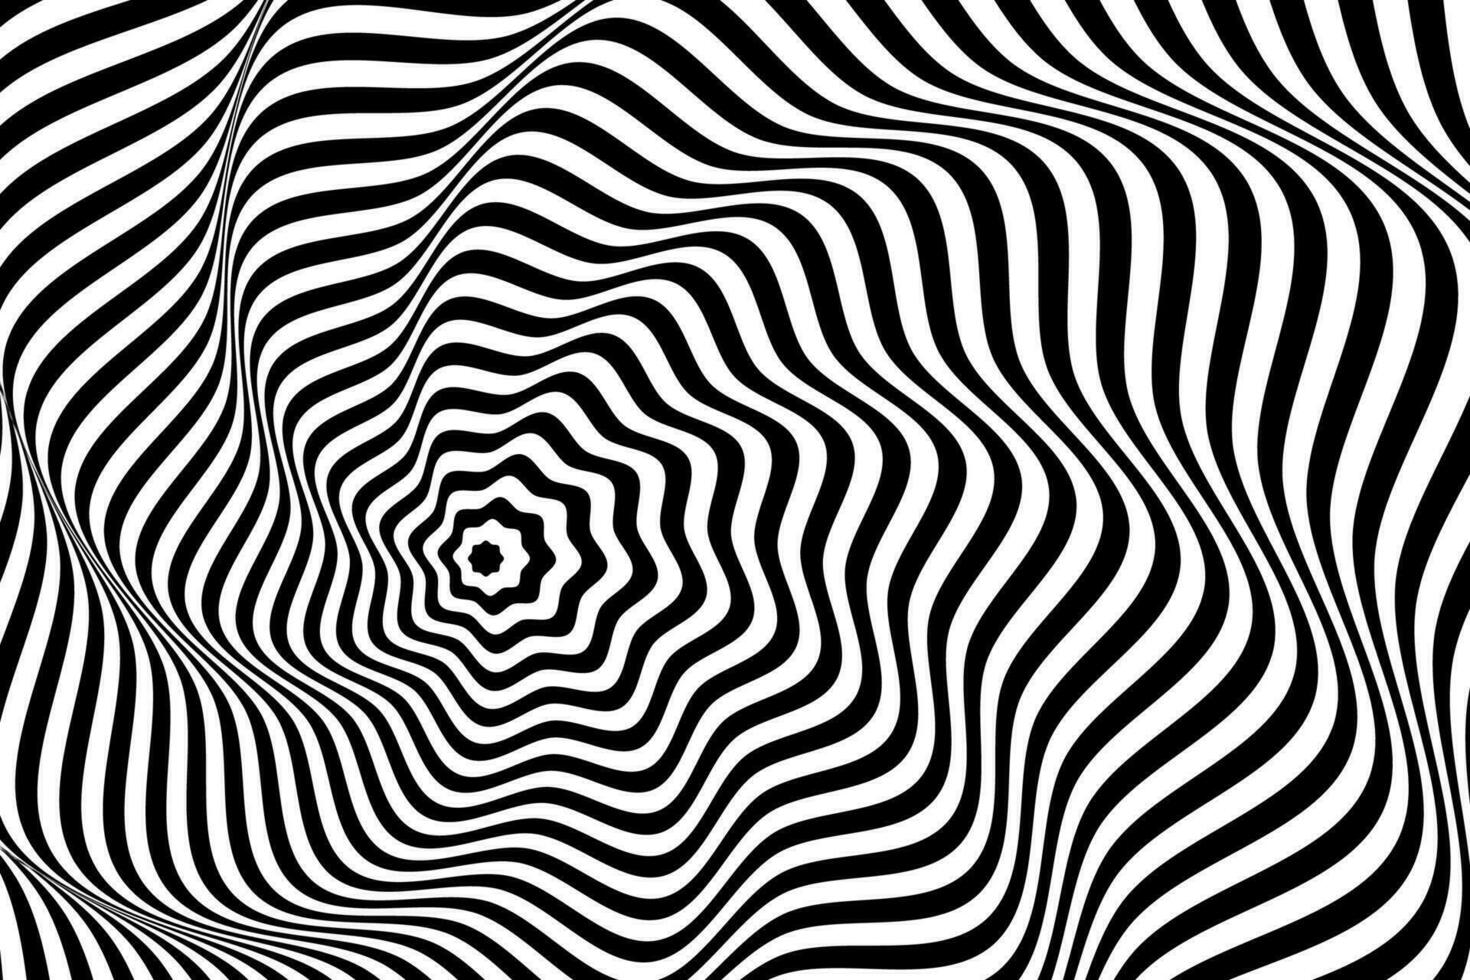 Optical illusions. Abstract striped with monochrome waves background. vector illustration